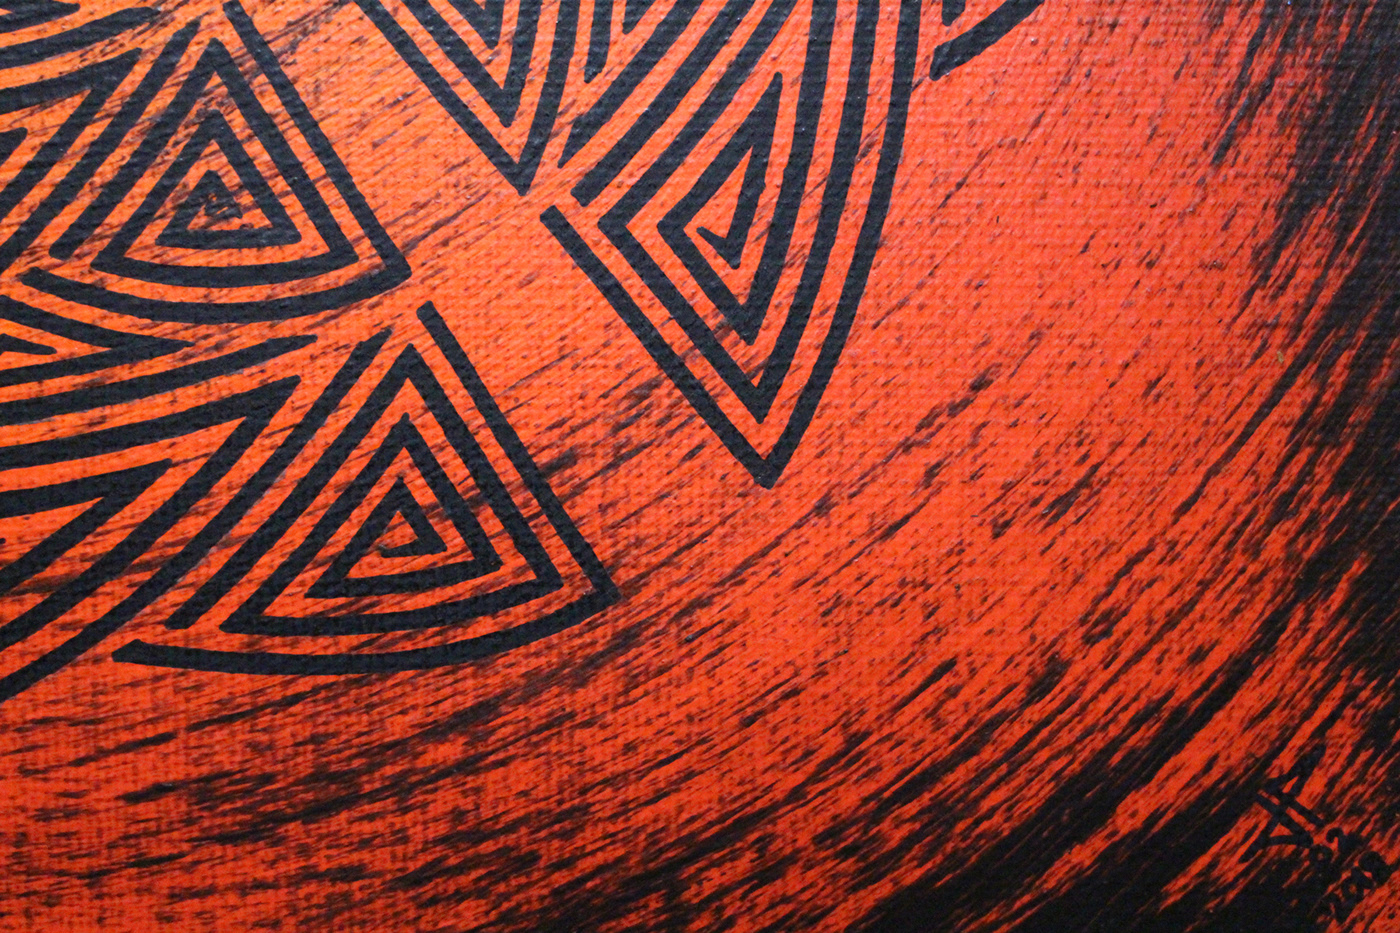 Drawing  artwork painting   orange tribal pattern design canvas acrylic abstract